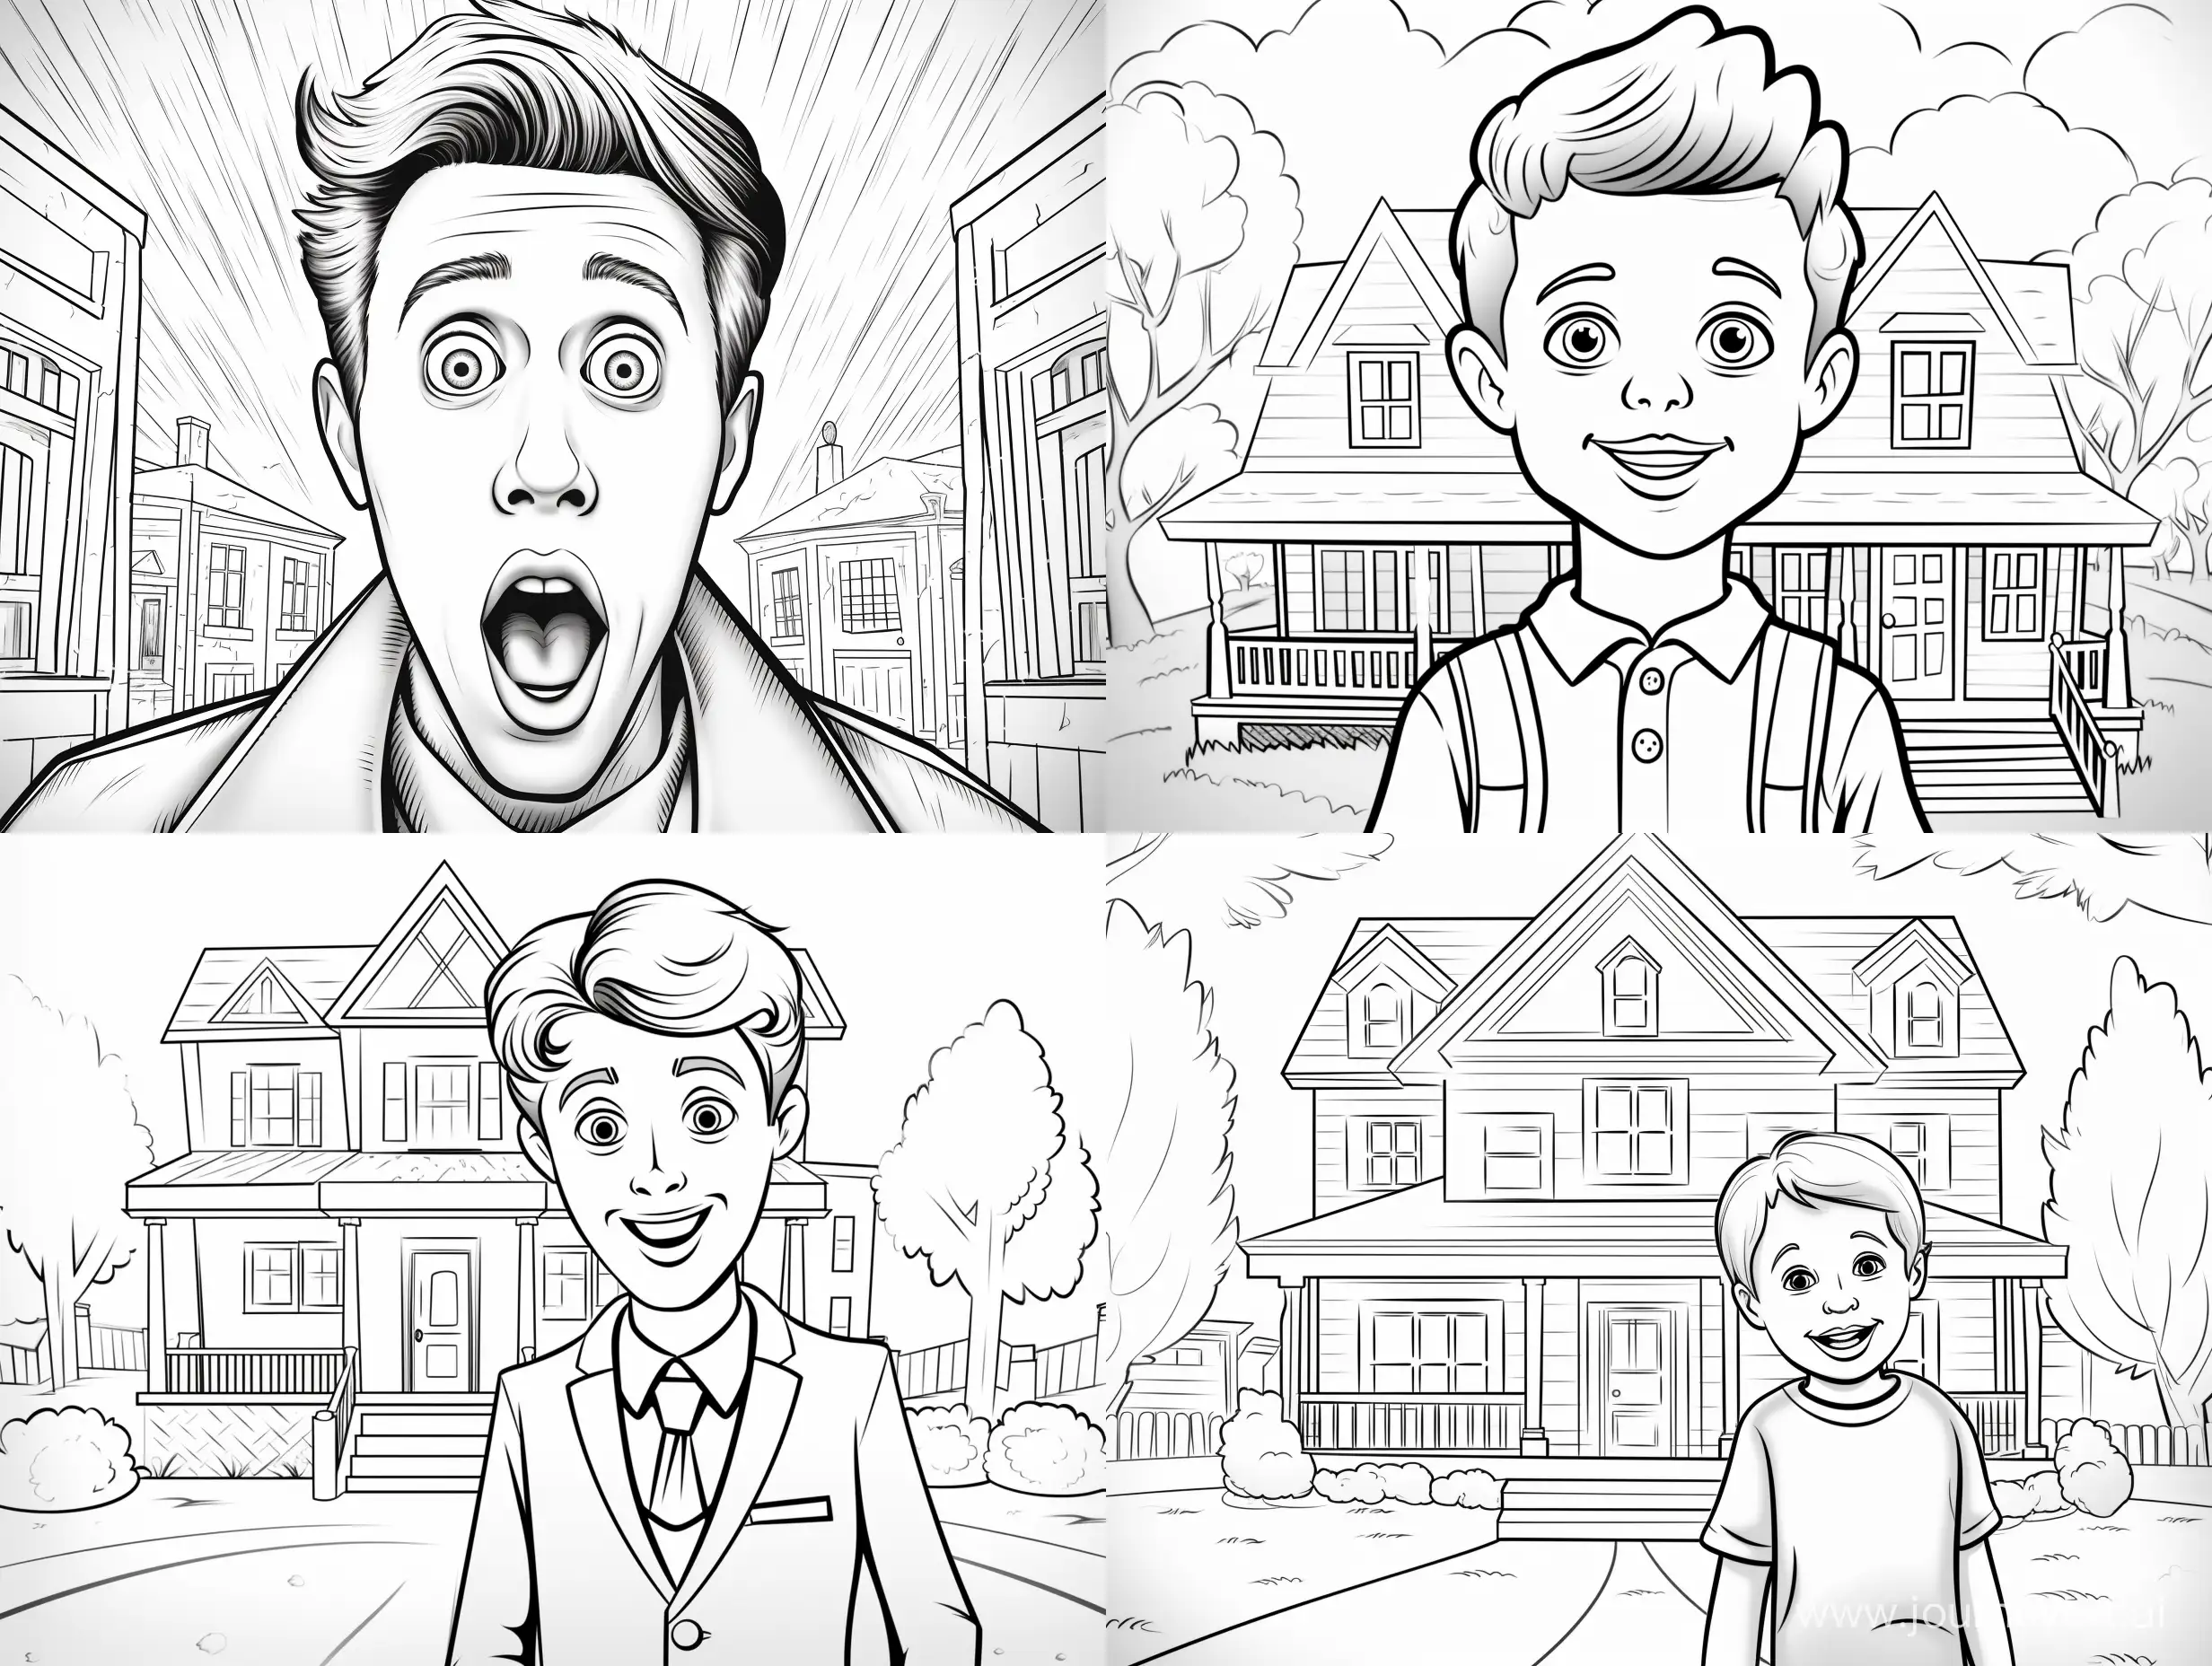 Coloring page for kids, house of Home Alone film, cartoon style, low detail, thick lines, no shading